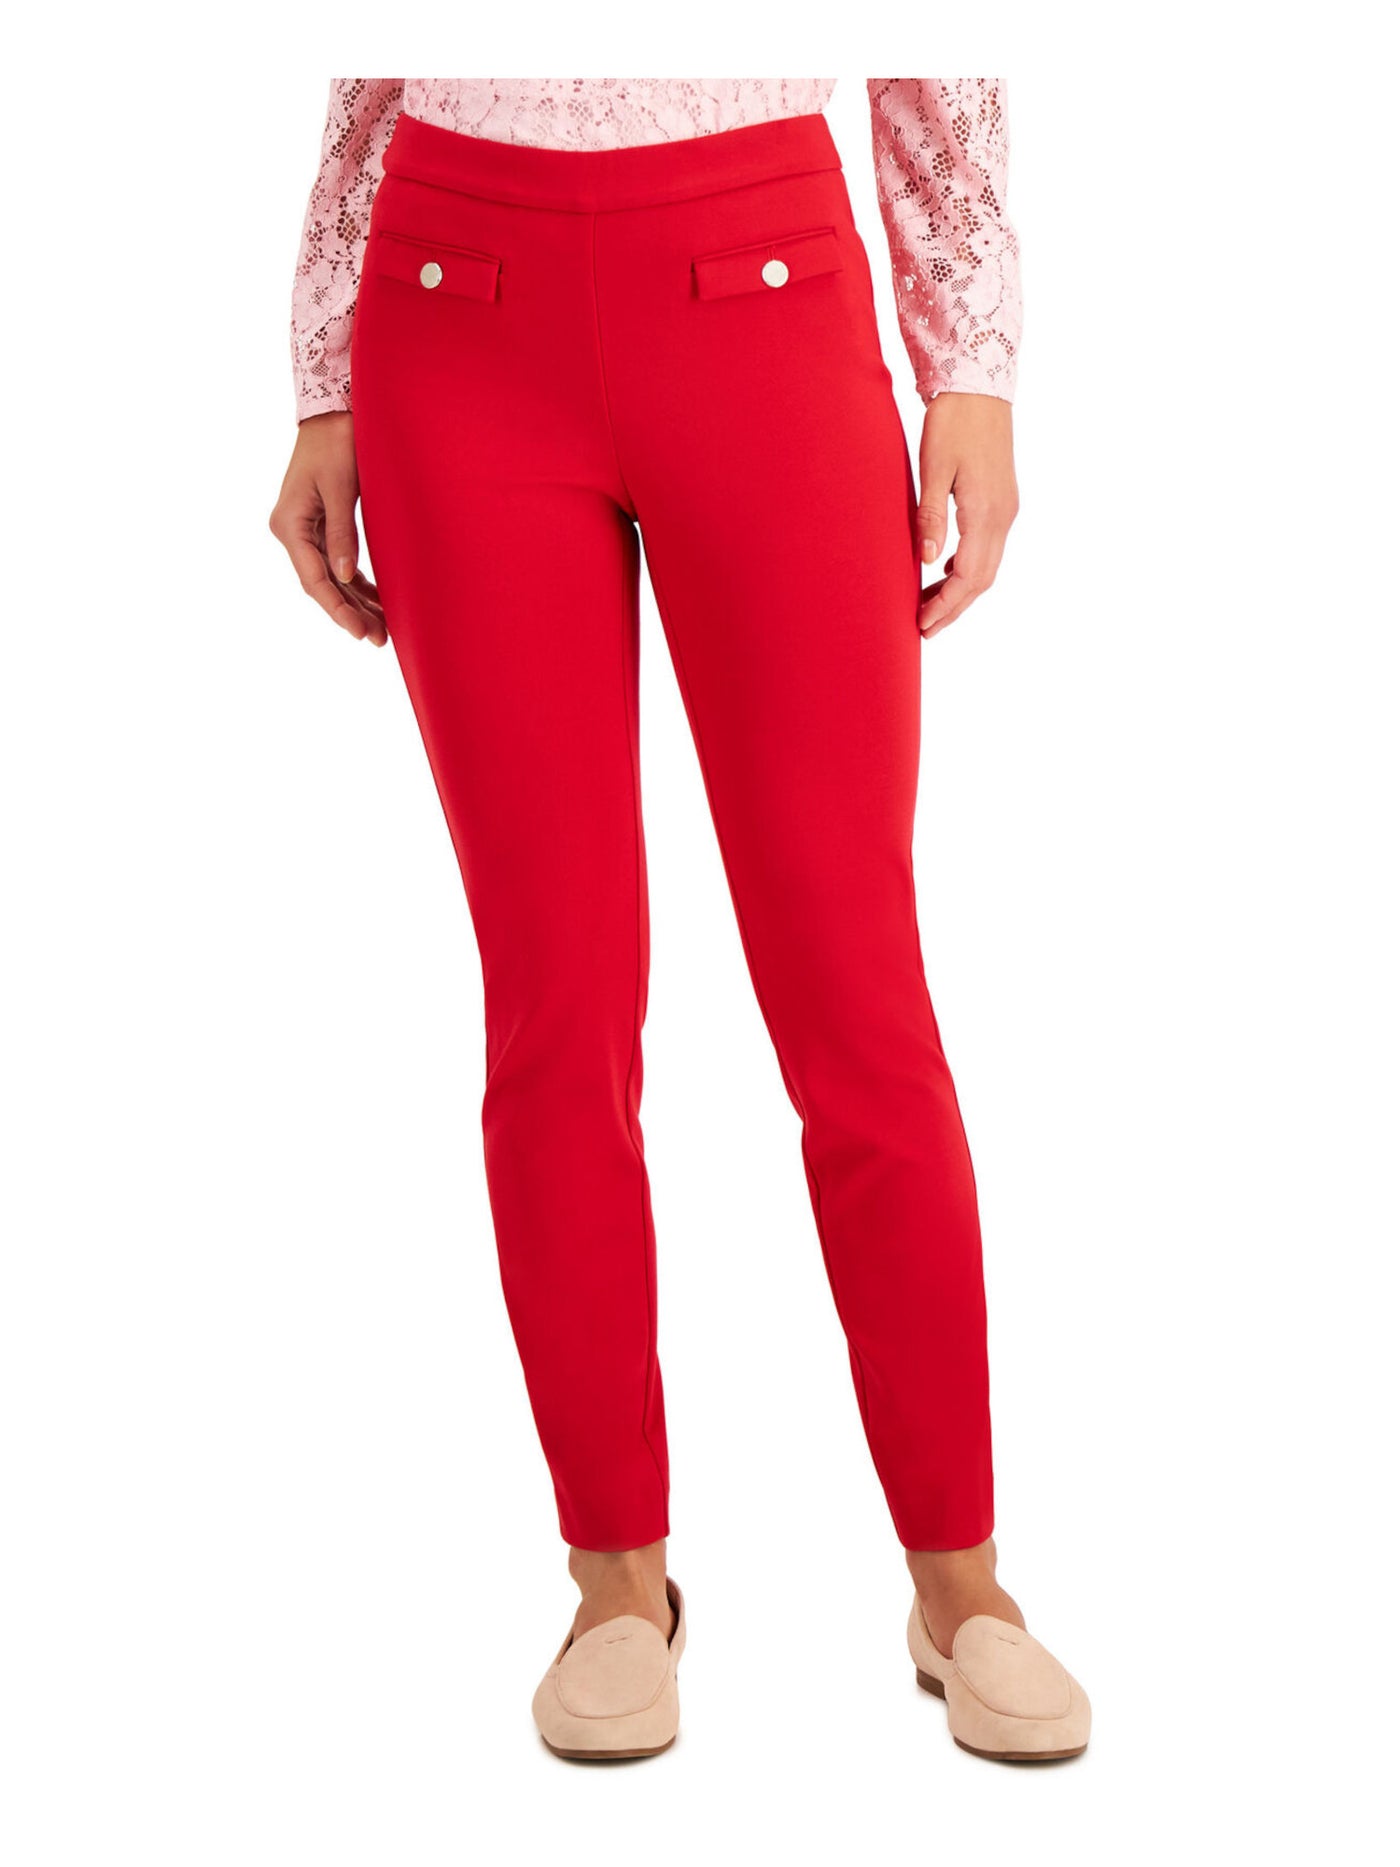 CHARTER CLUB Womens Red Pocketed Pull On Style Skinny Pants 16